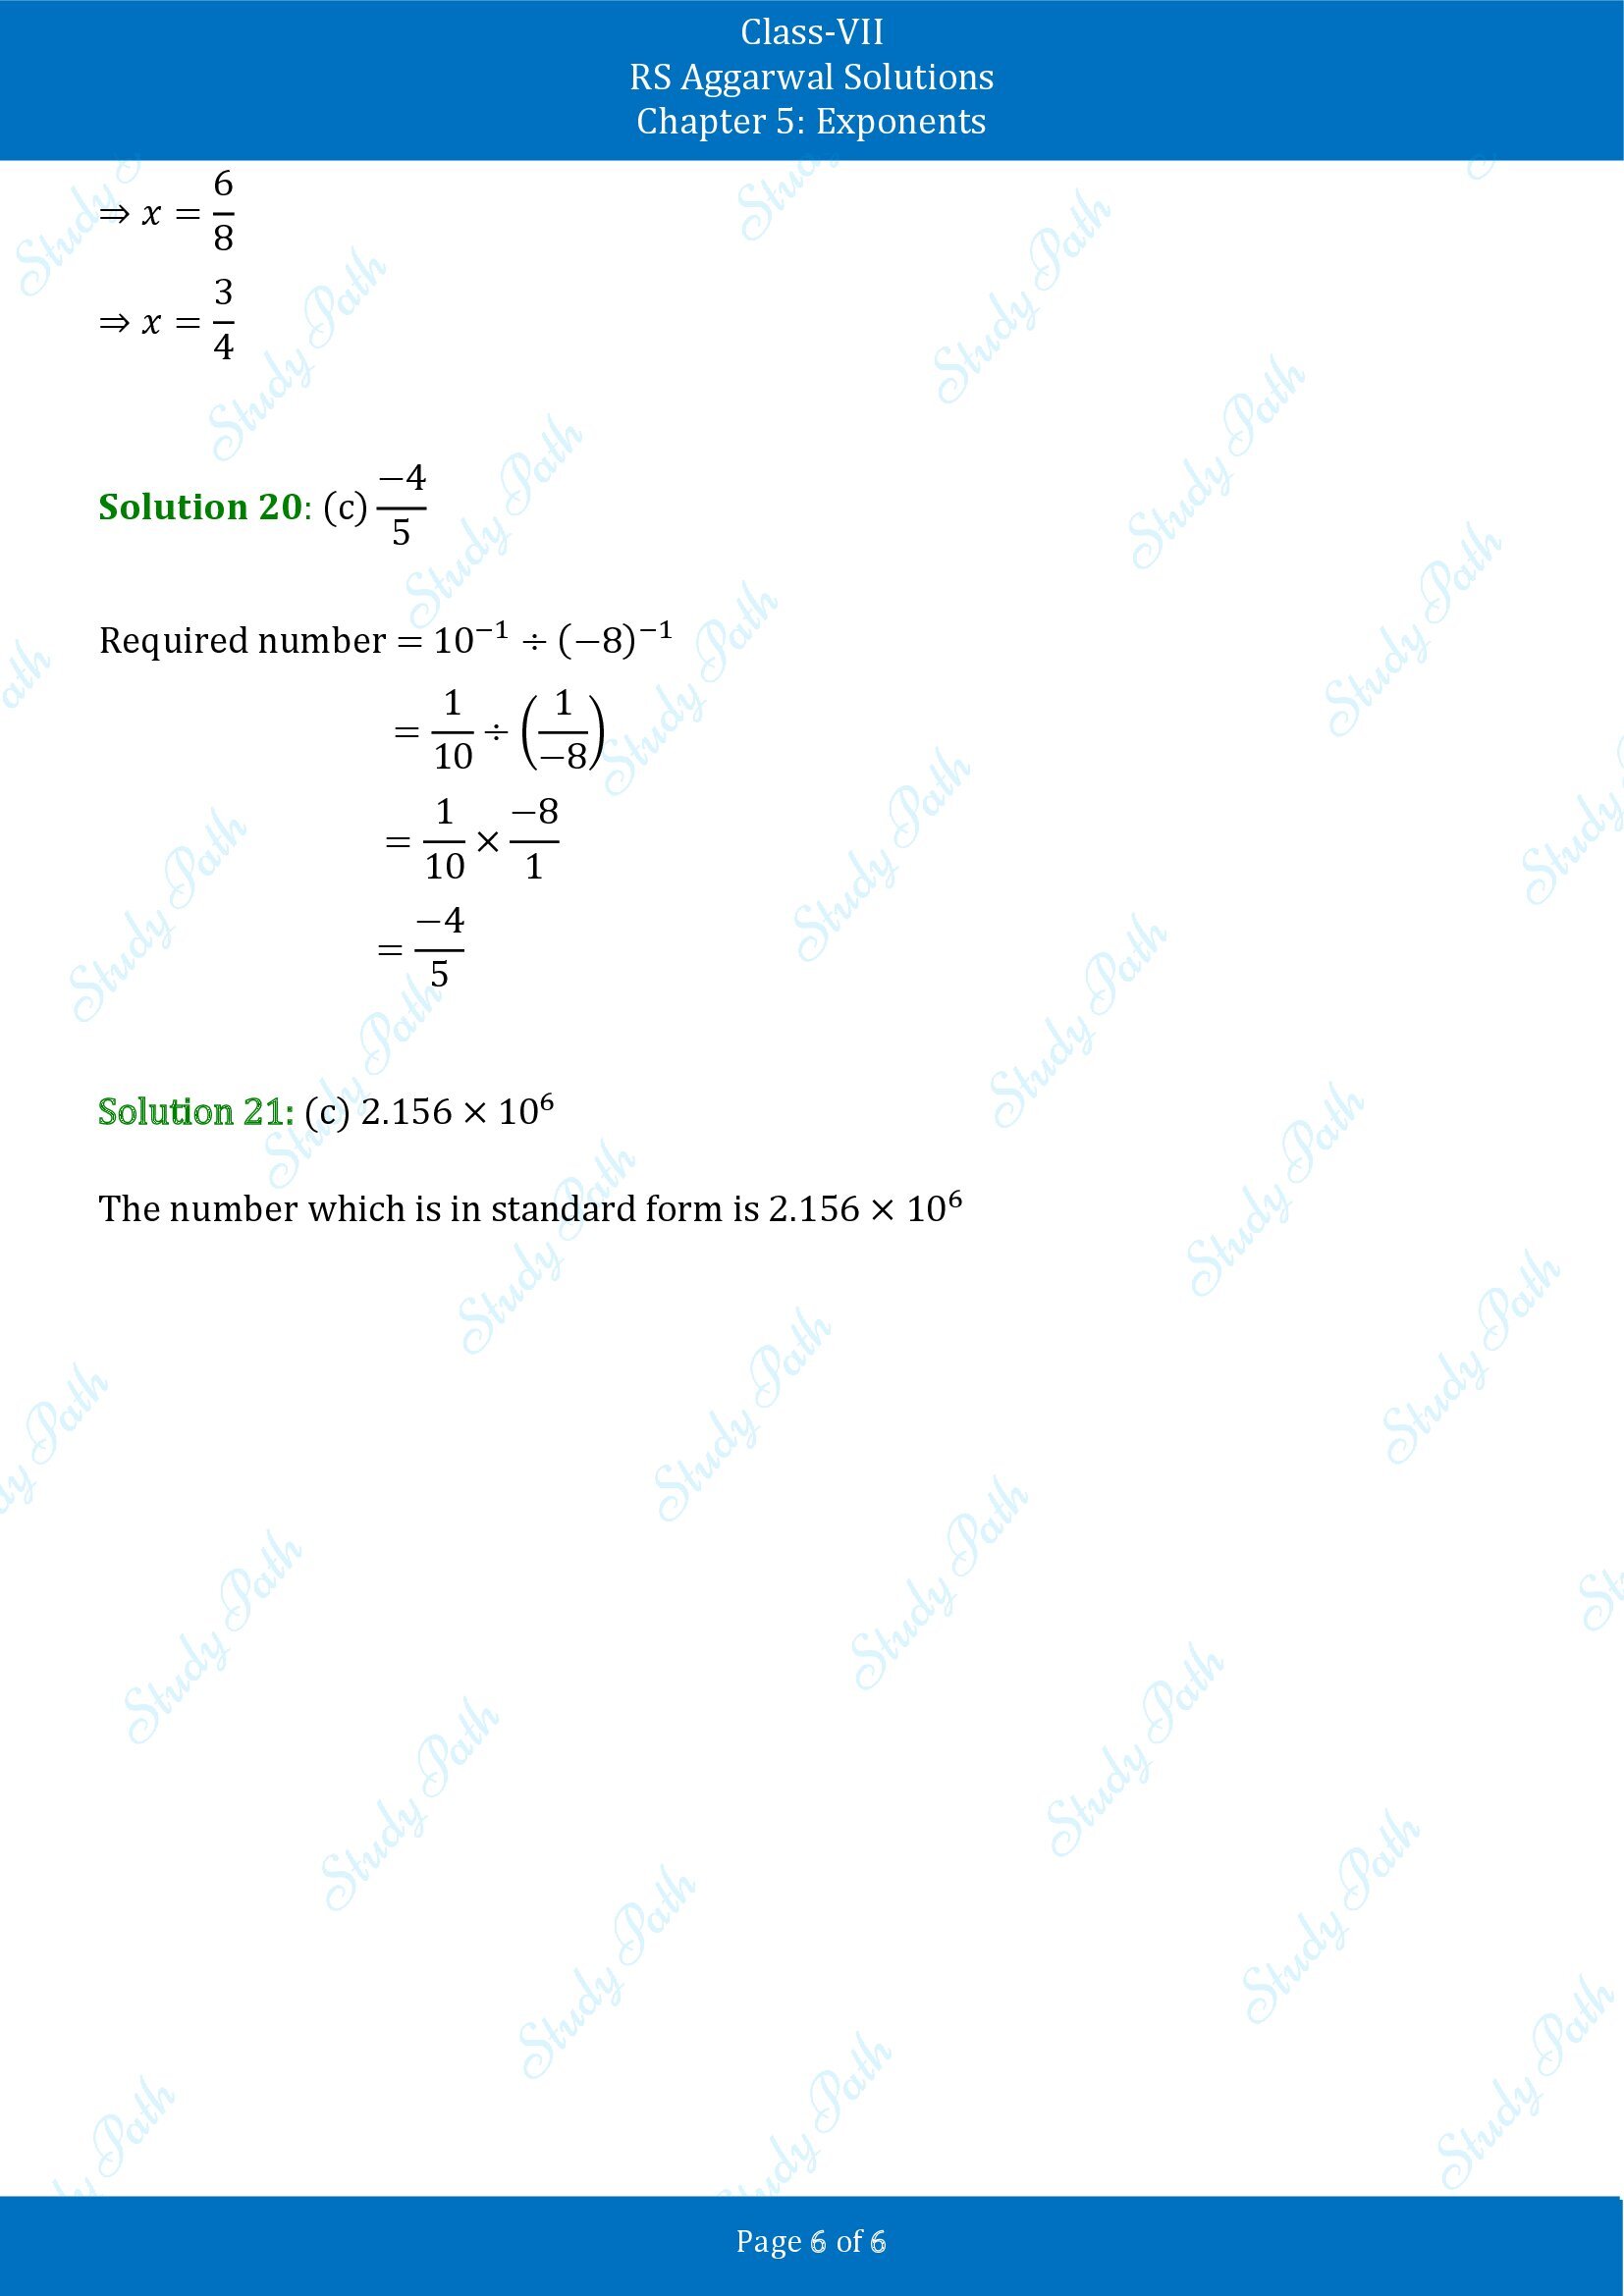 RS Aggarwal Solutions Class 7 Chapter 5 Exponents Exercise 5C MCQ 00006